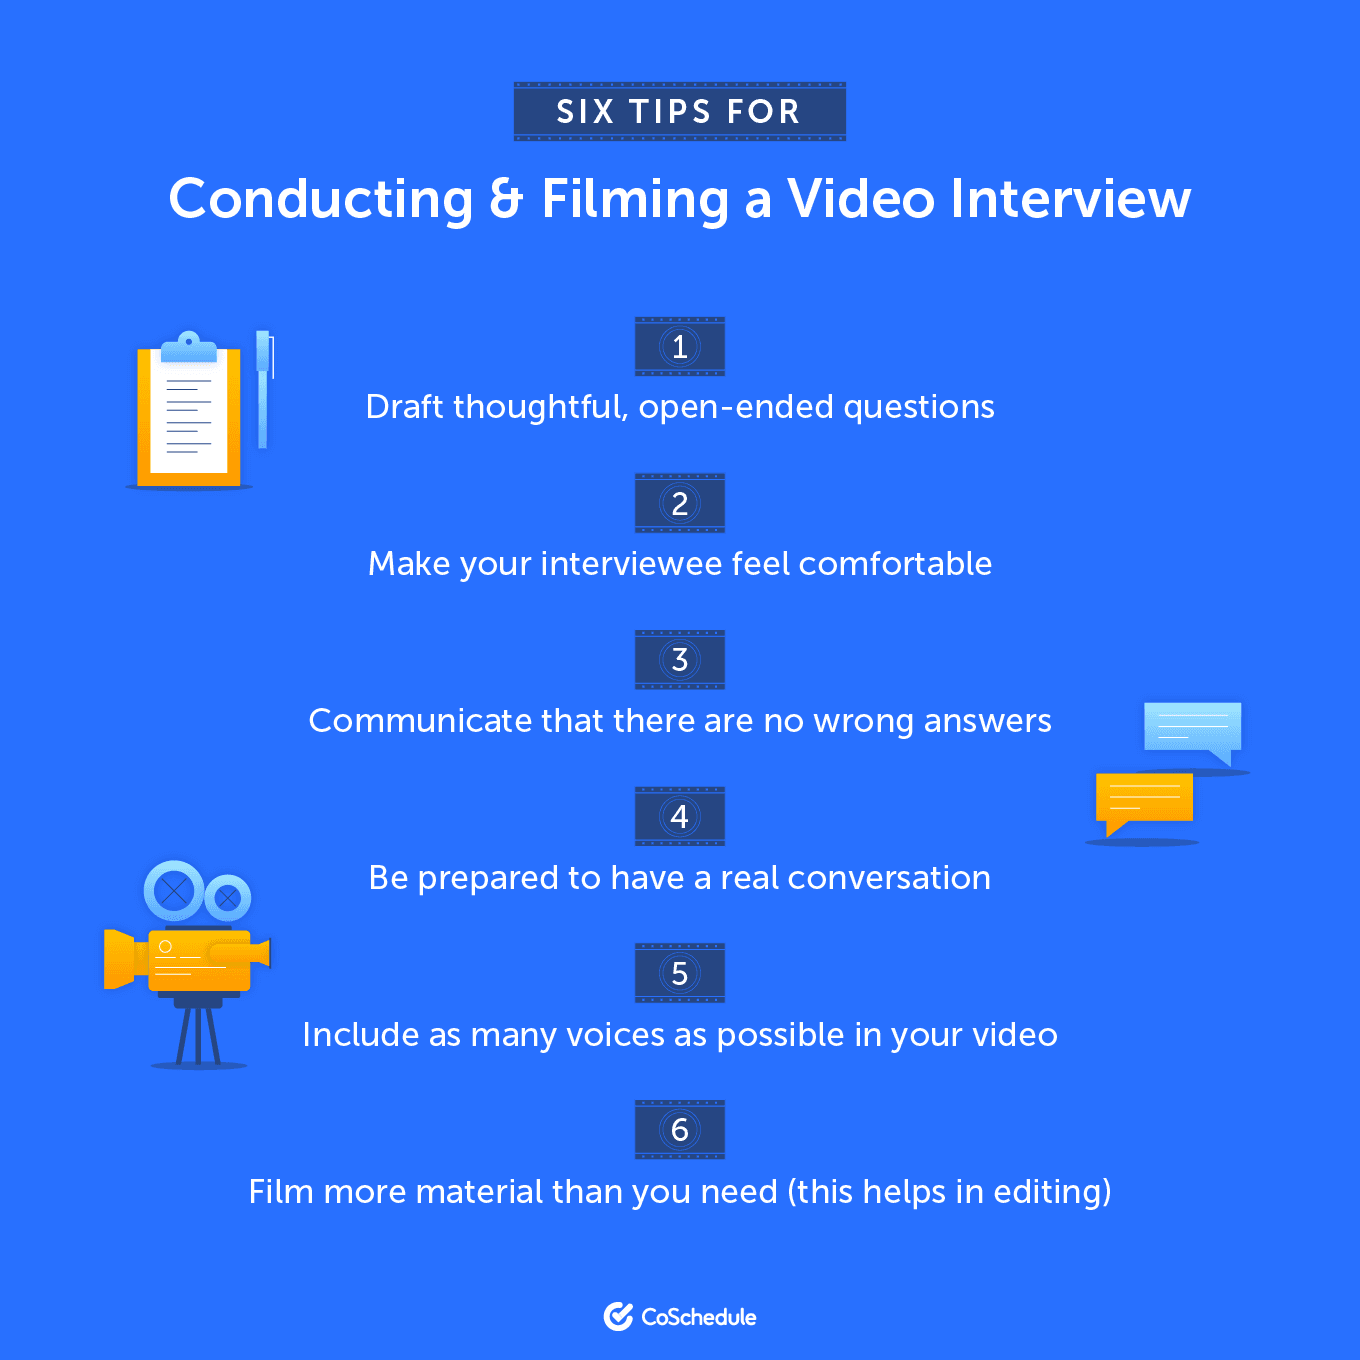 Six tips for conducting and filming a video interview